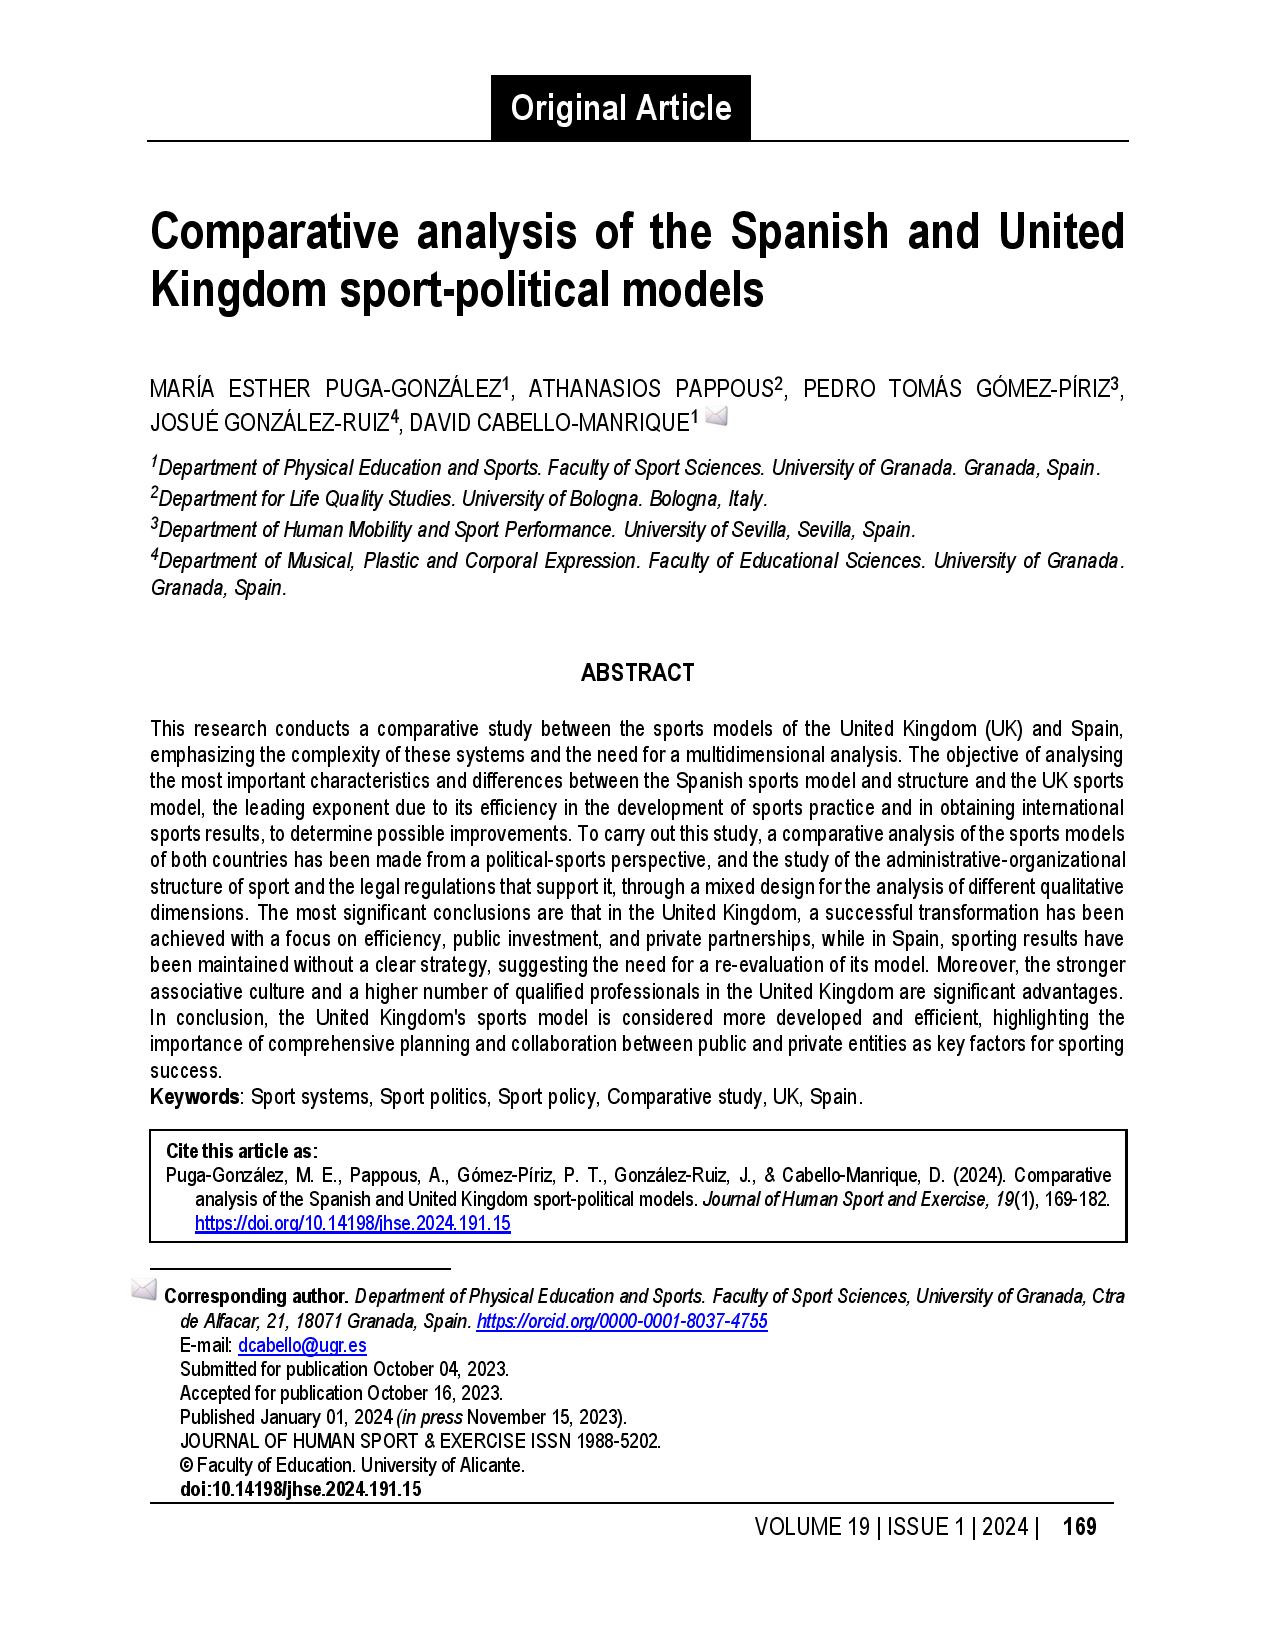 Comparative analysis of the Spanish and United Kingdom sport-political models